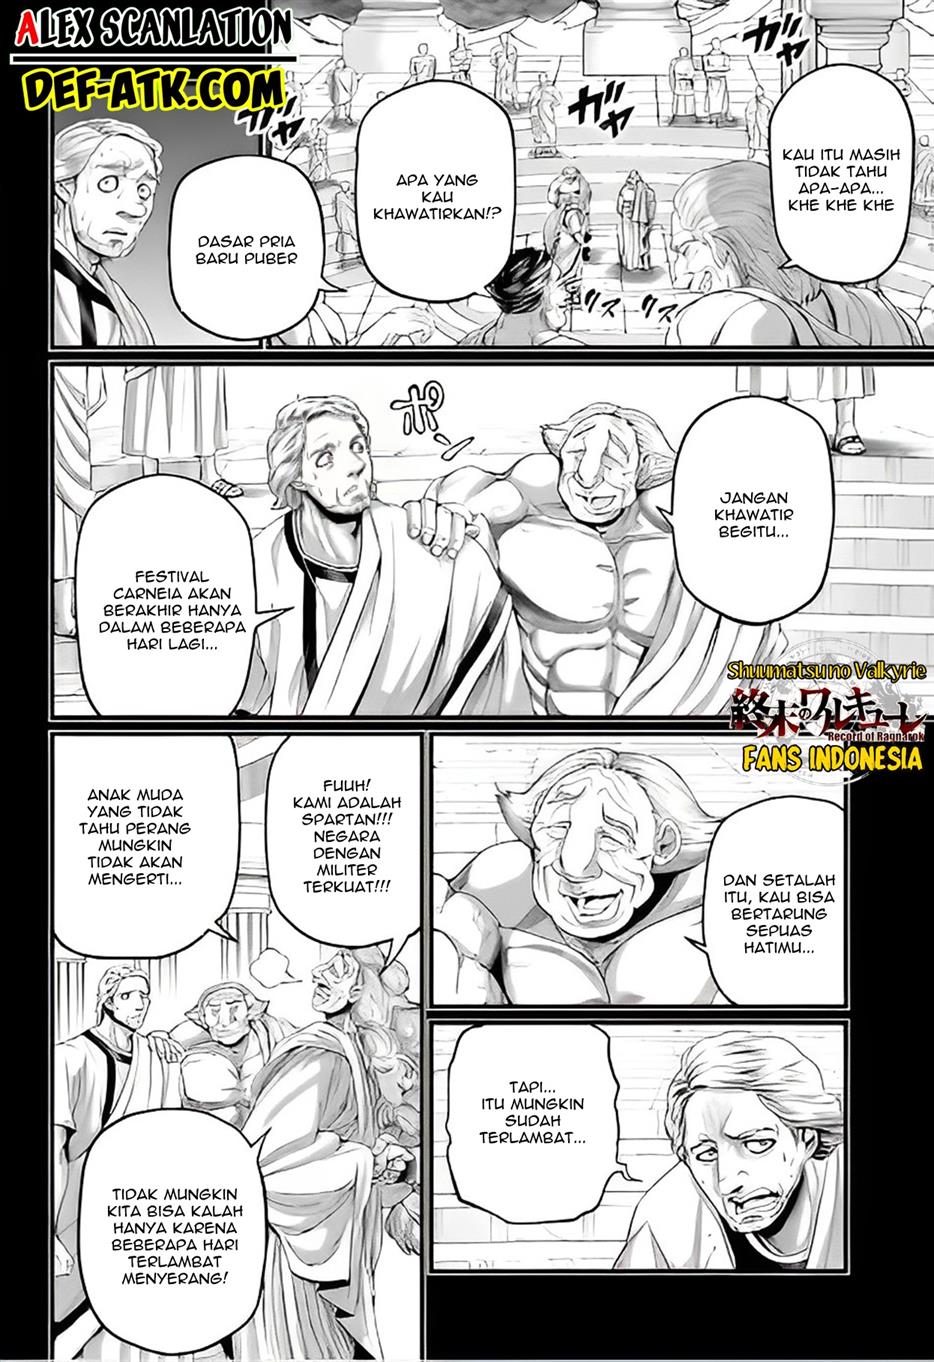 Record Of Ragnarok Ch 79 Shuumatsu No Valkyrie Chapter 79 (Translated And Upscaled) , 41% OFF